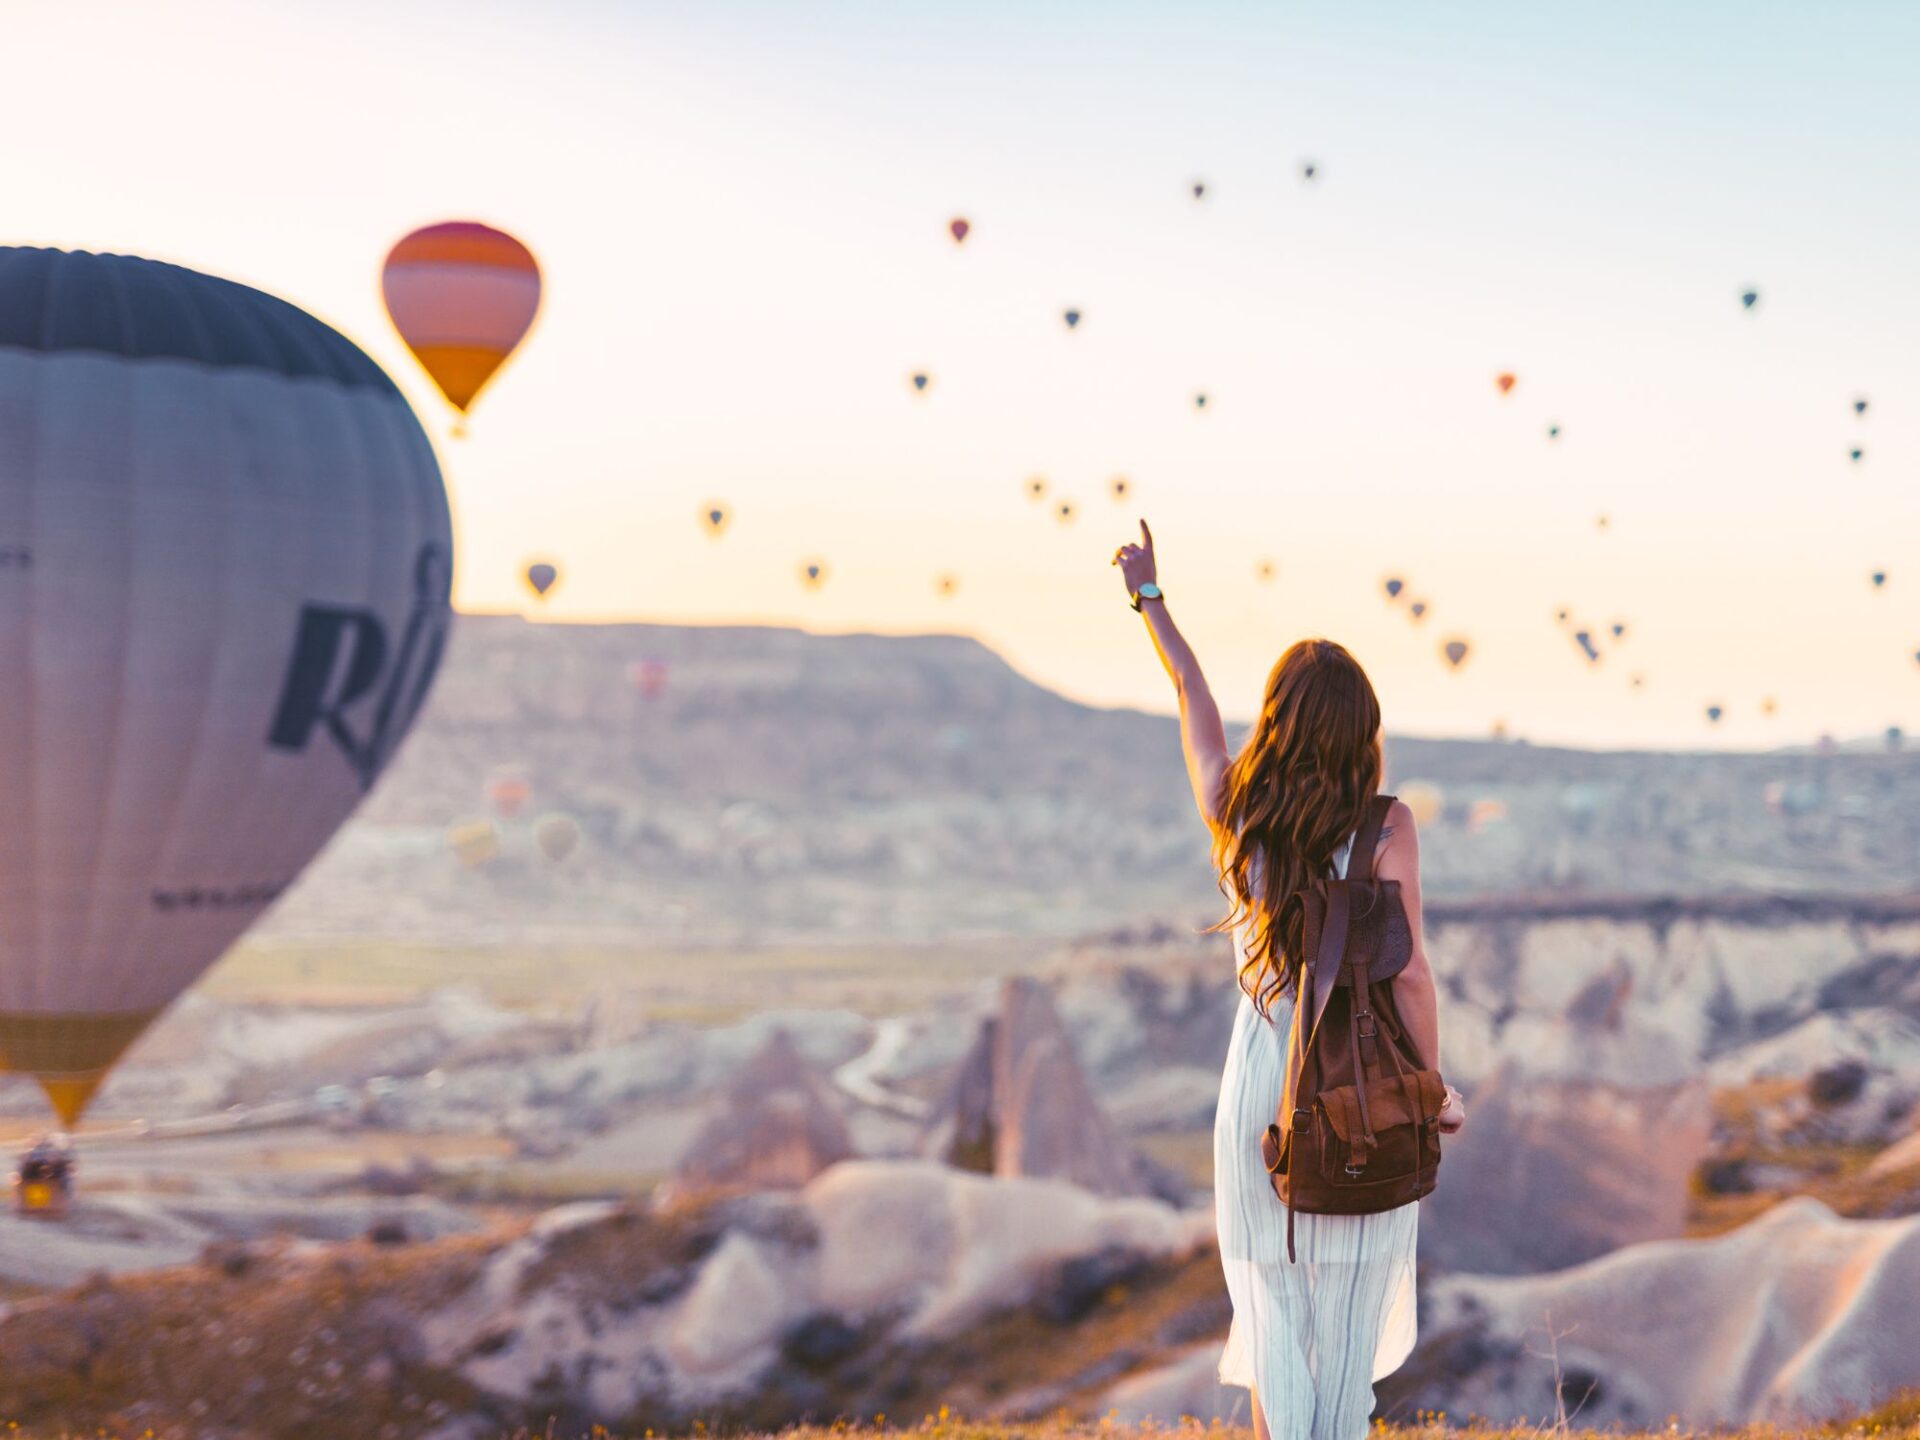 What to see on your first visit to Turkey from UAE - Cappadocia